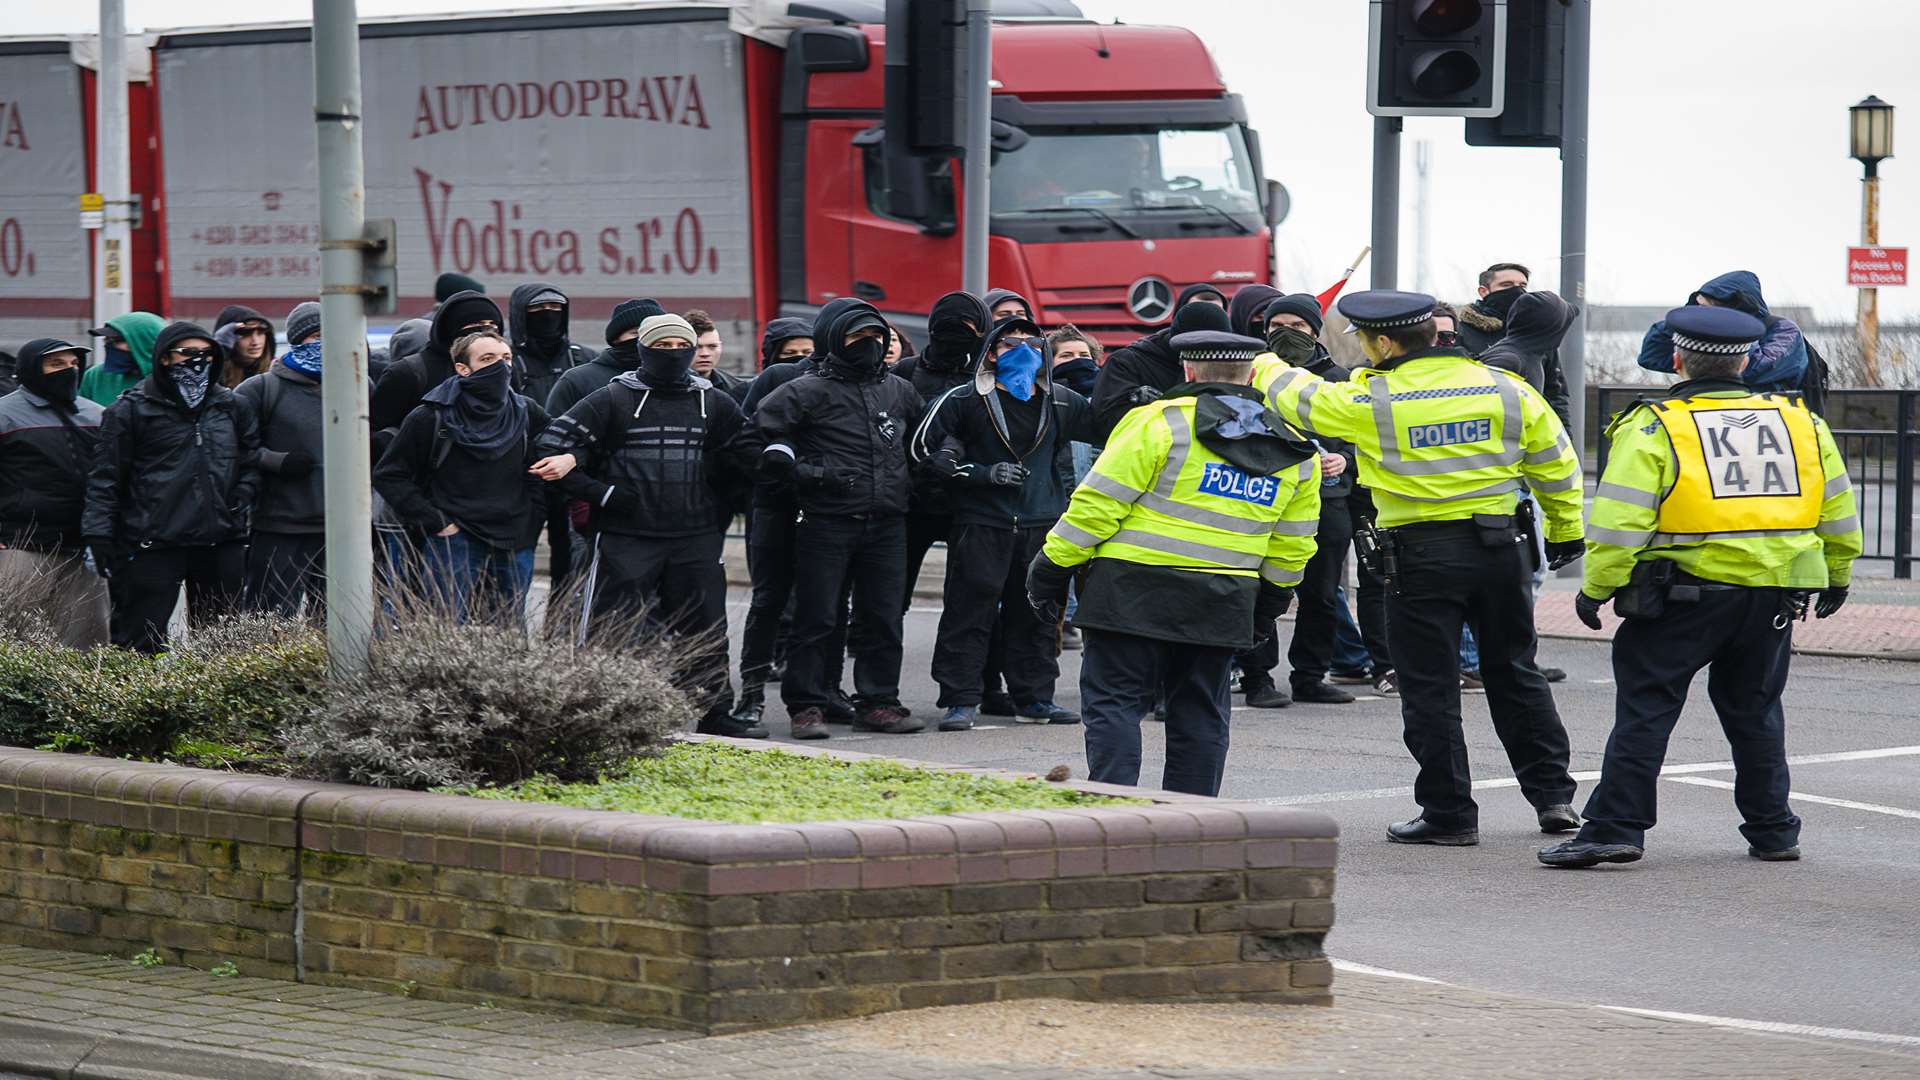 Scenes from the disturbances in Dover in January this year